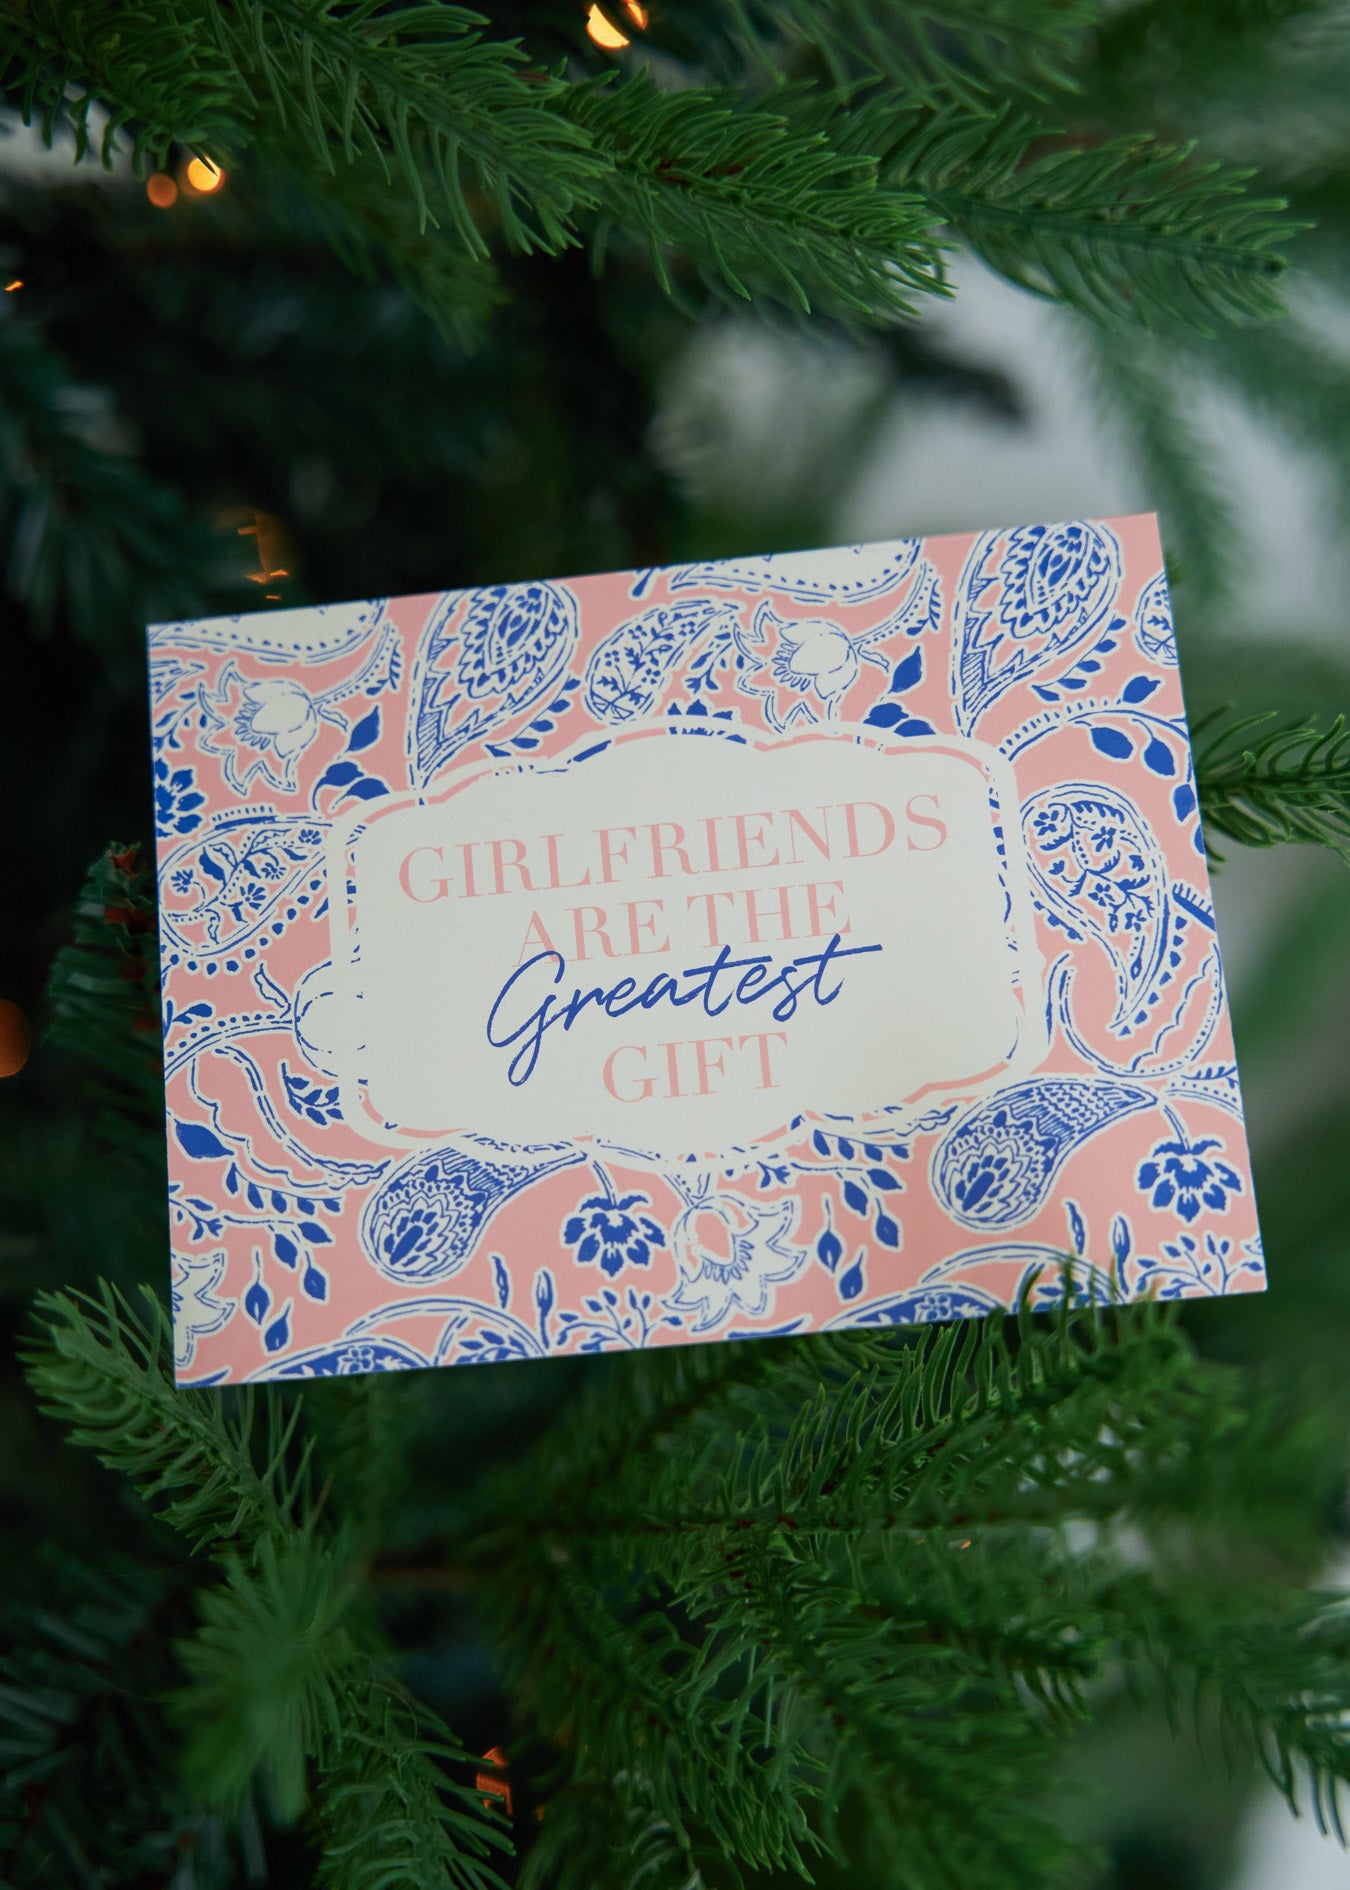 Girlfriends are the Greatest Gift Card on Christmas Tree